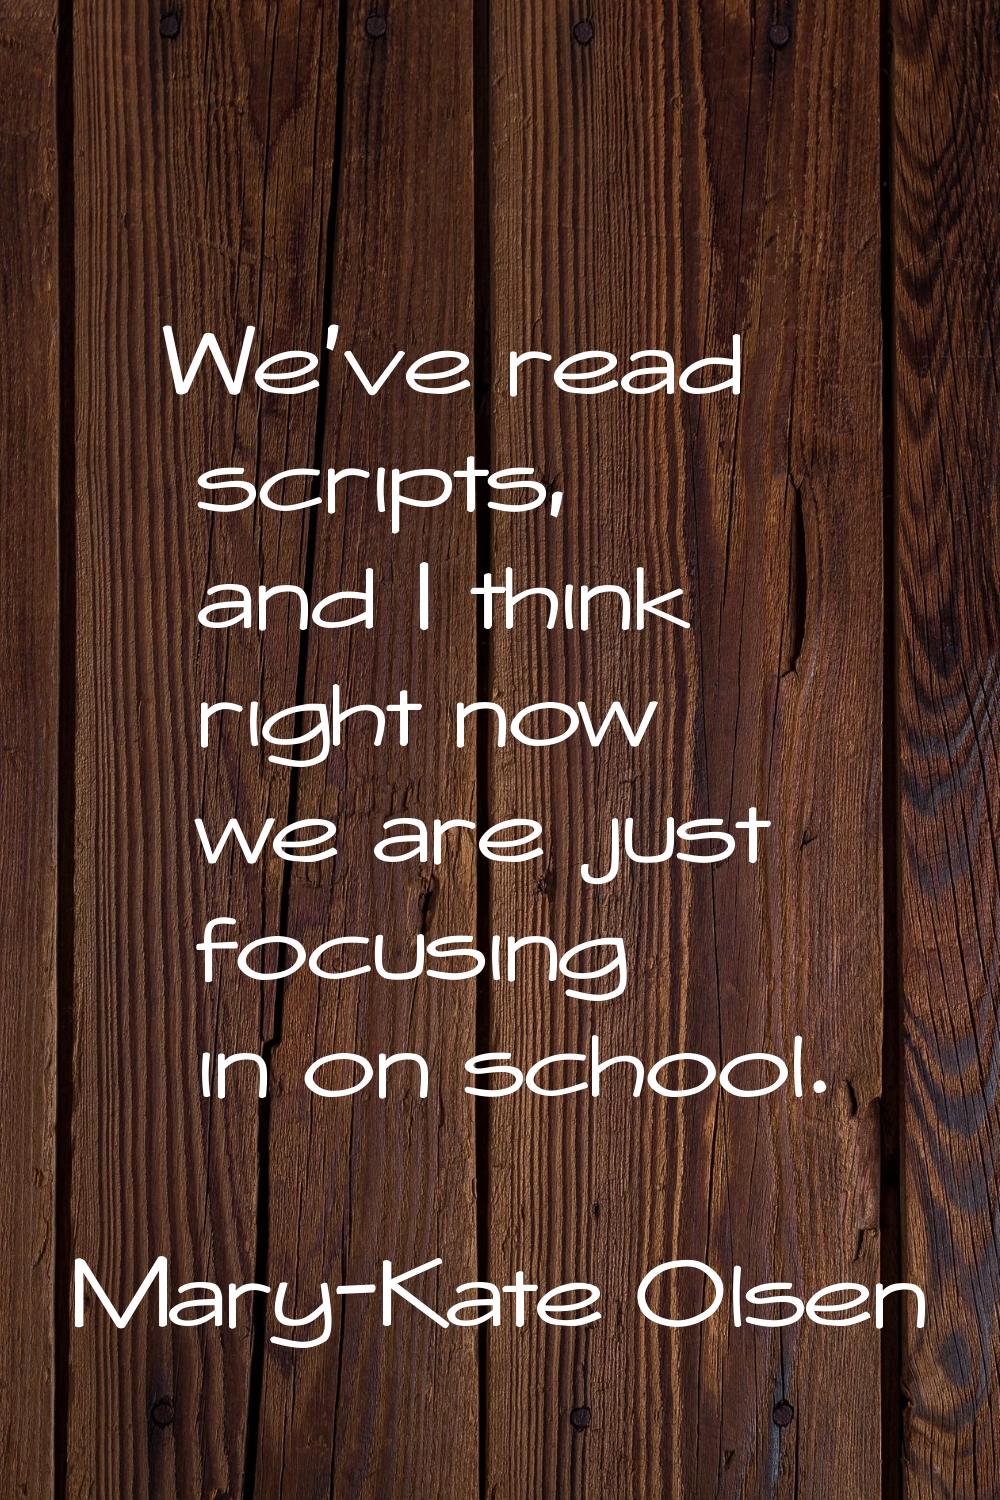 We've read scripts, and I think right now we are just focusing in on school.